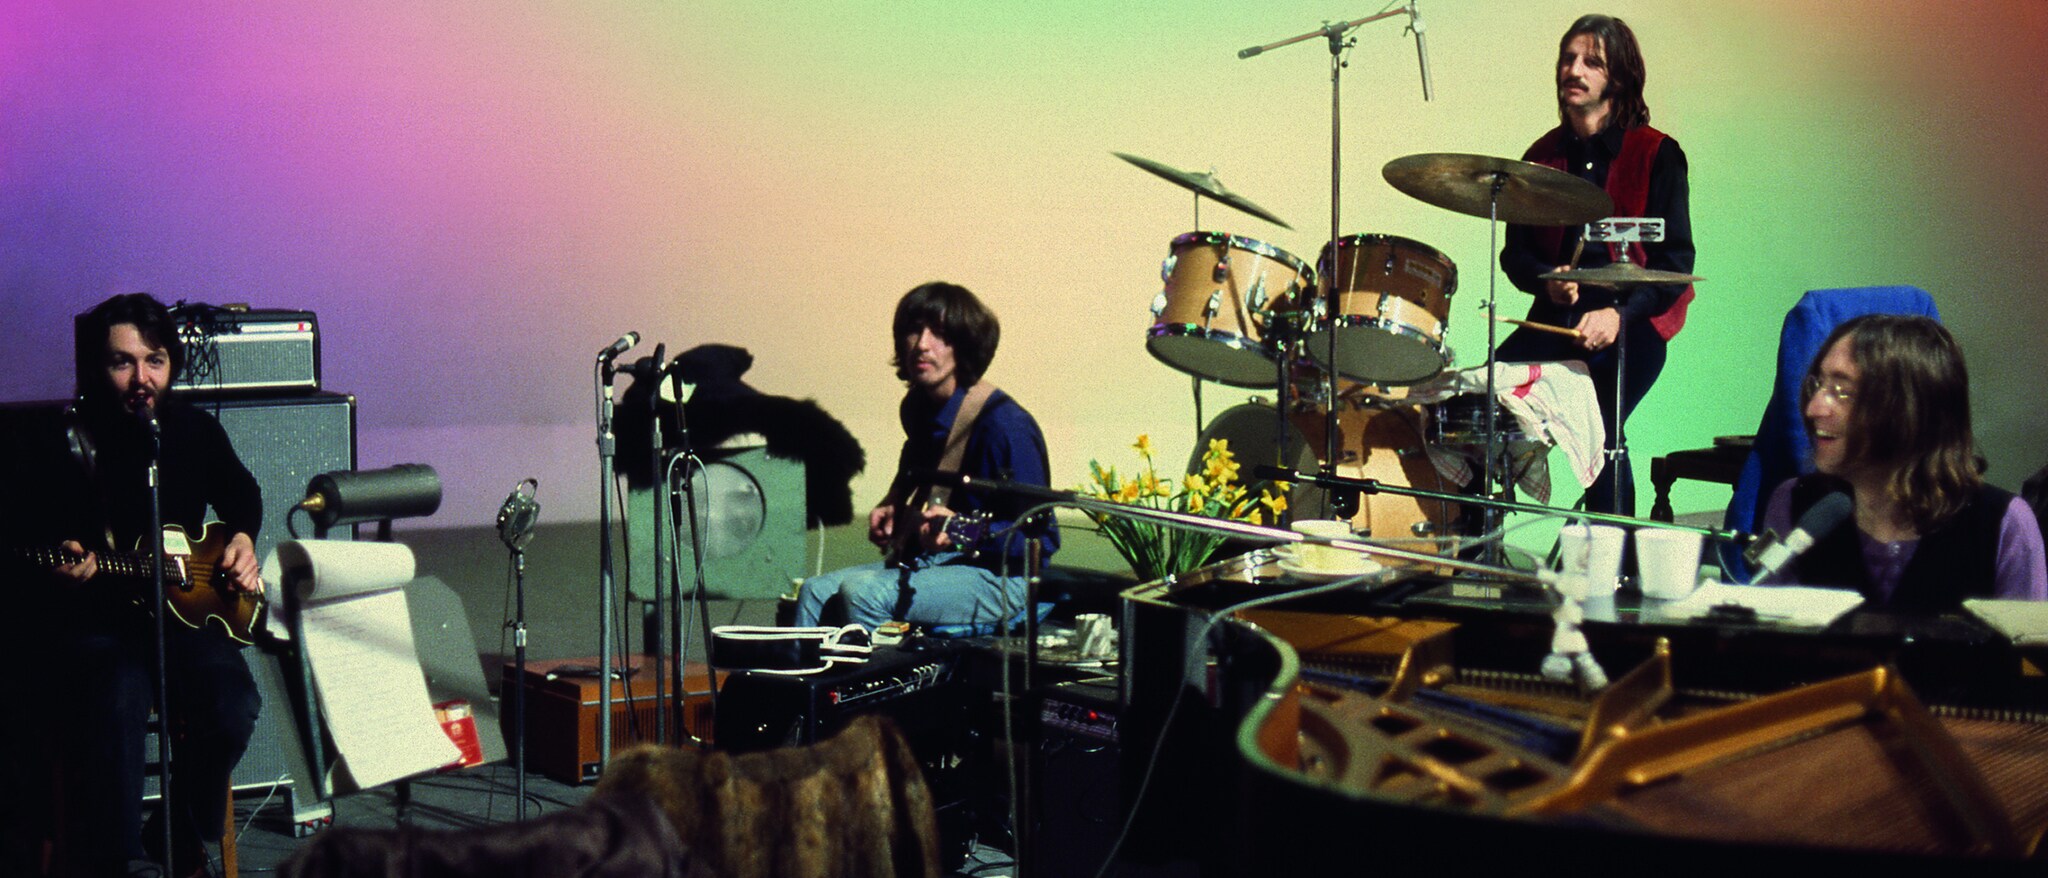 The Beatles: Get Back - Featured Content Banner